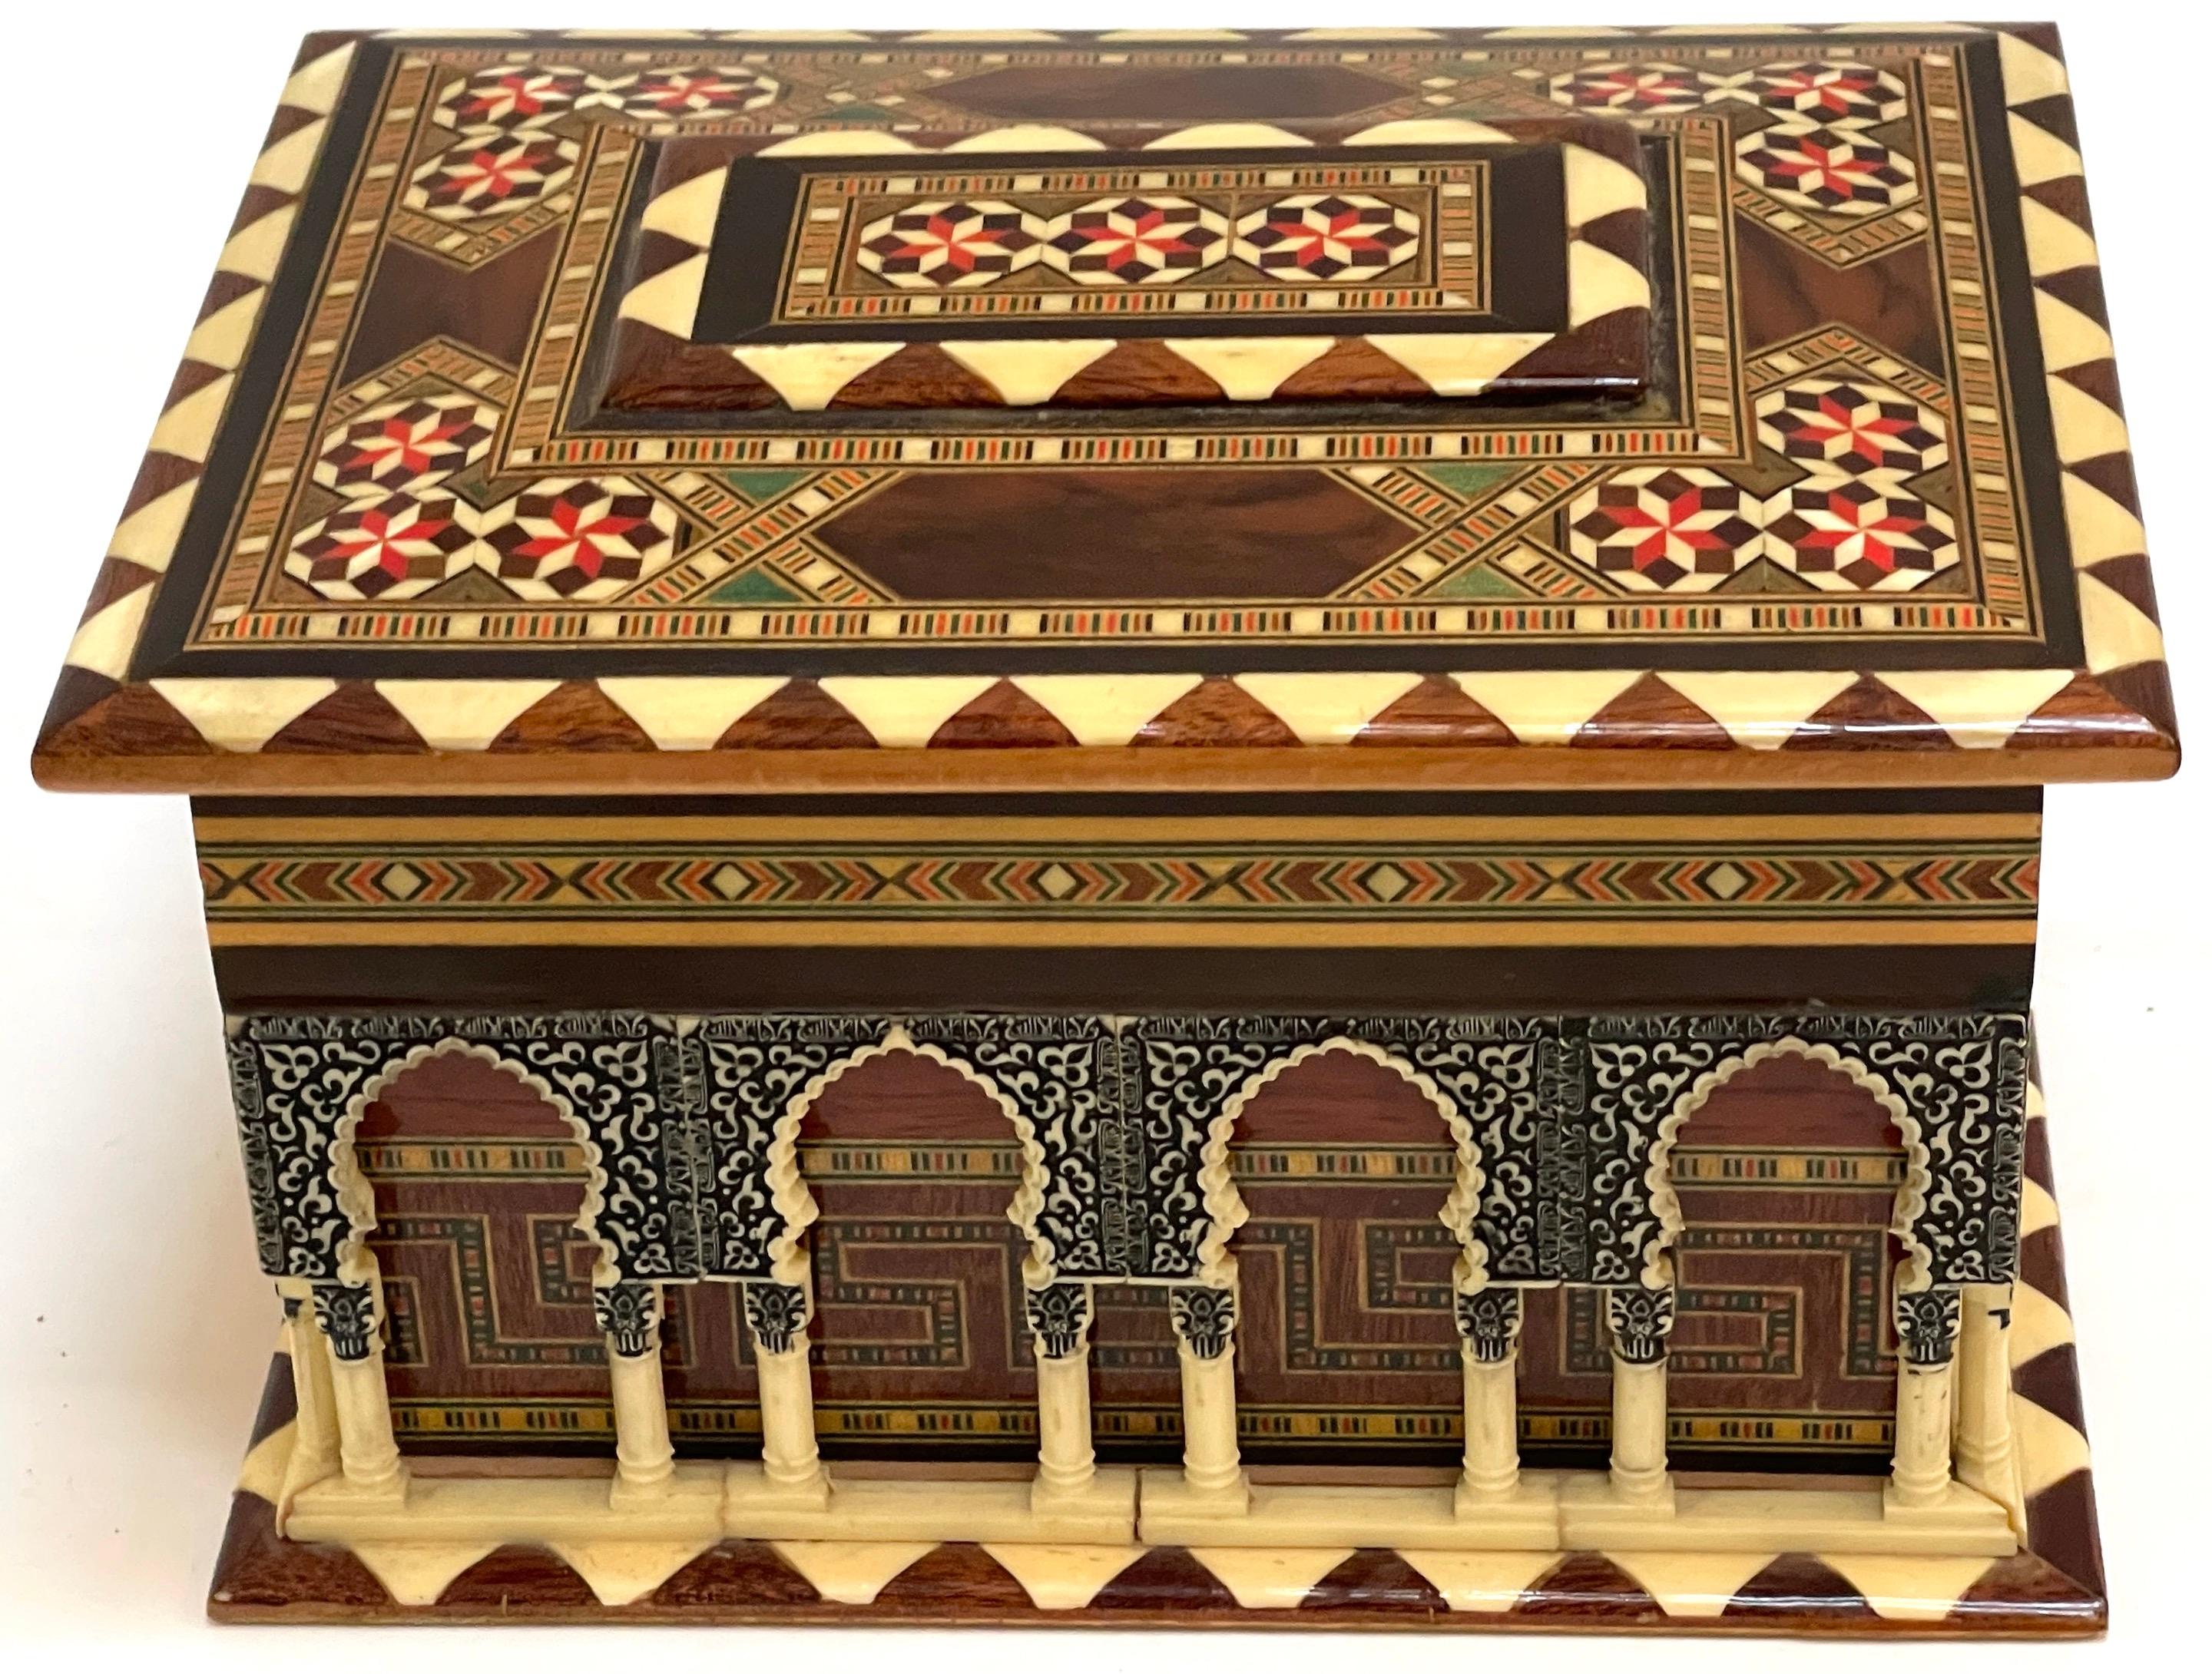 Inlay Architectural Model Box of the Alhambra Palace, with Key For Sale